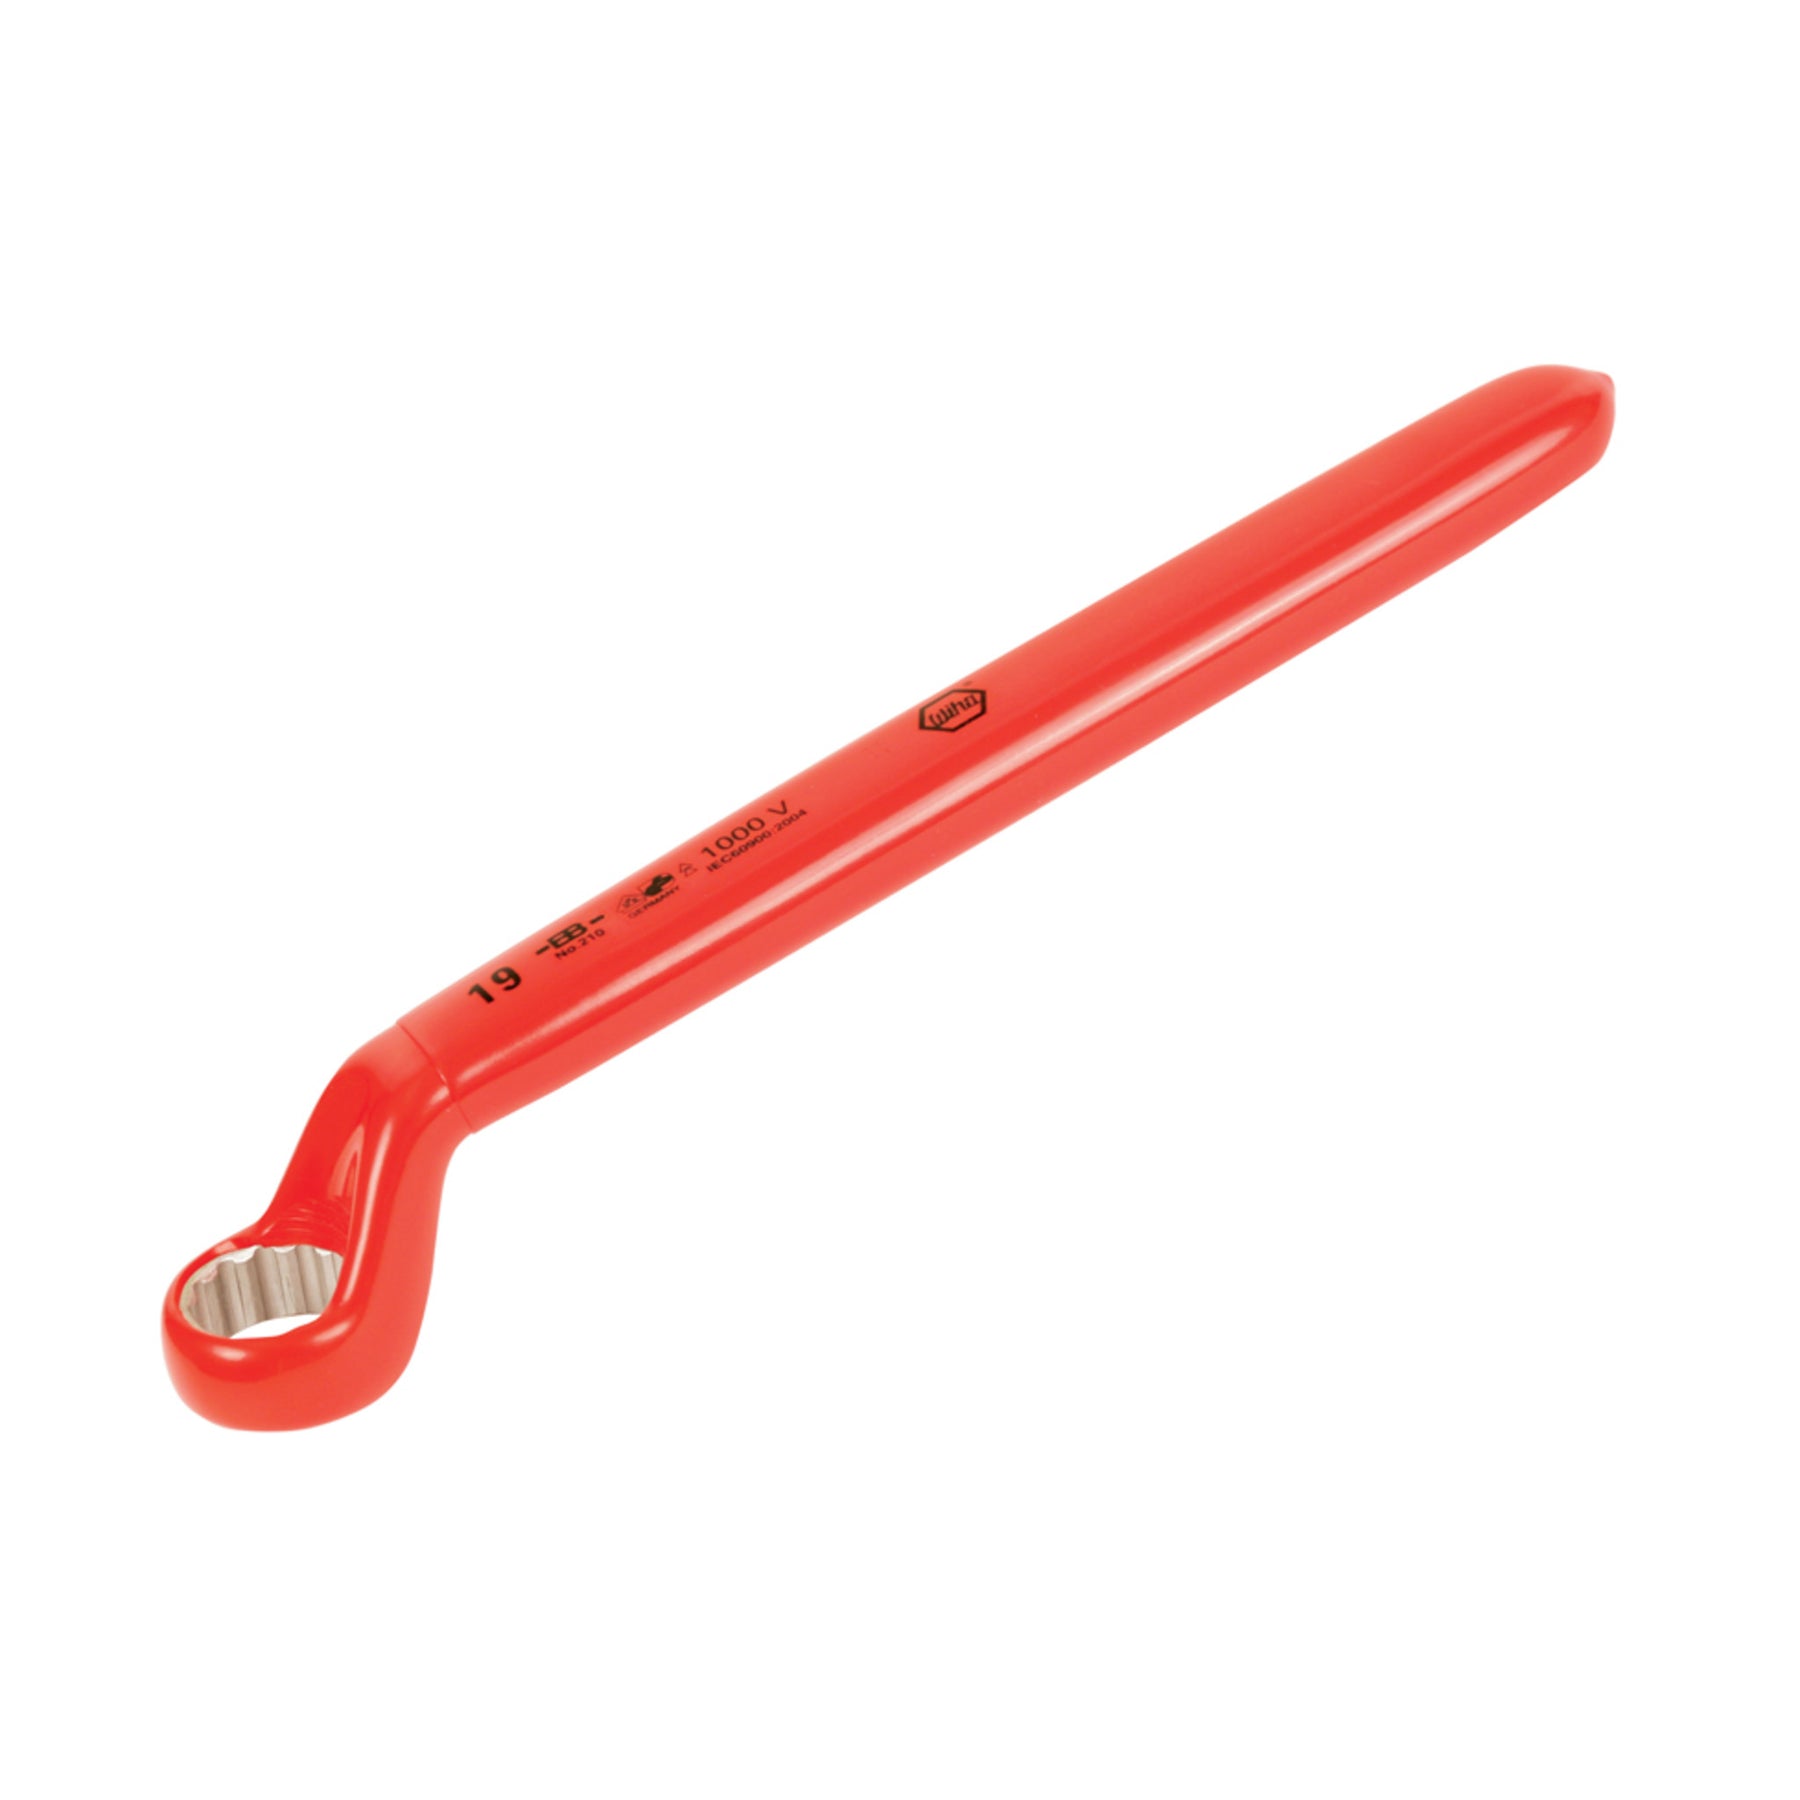 Insulated Deep Offset Wrench 7/16"